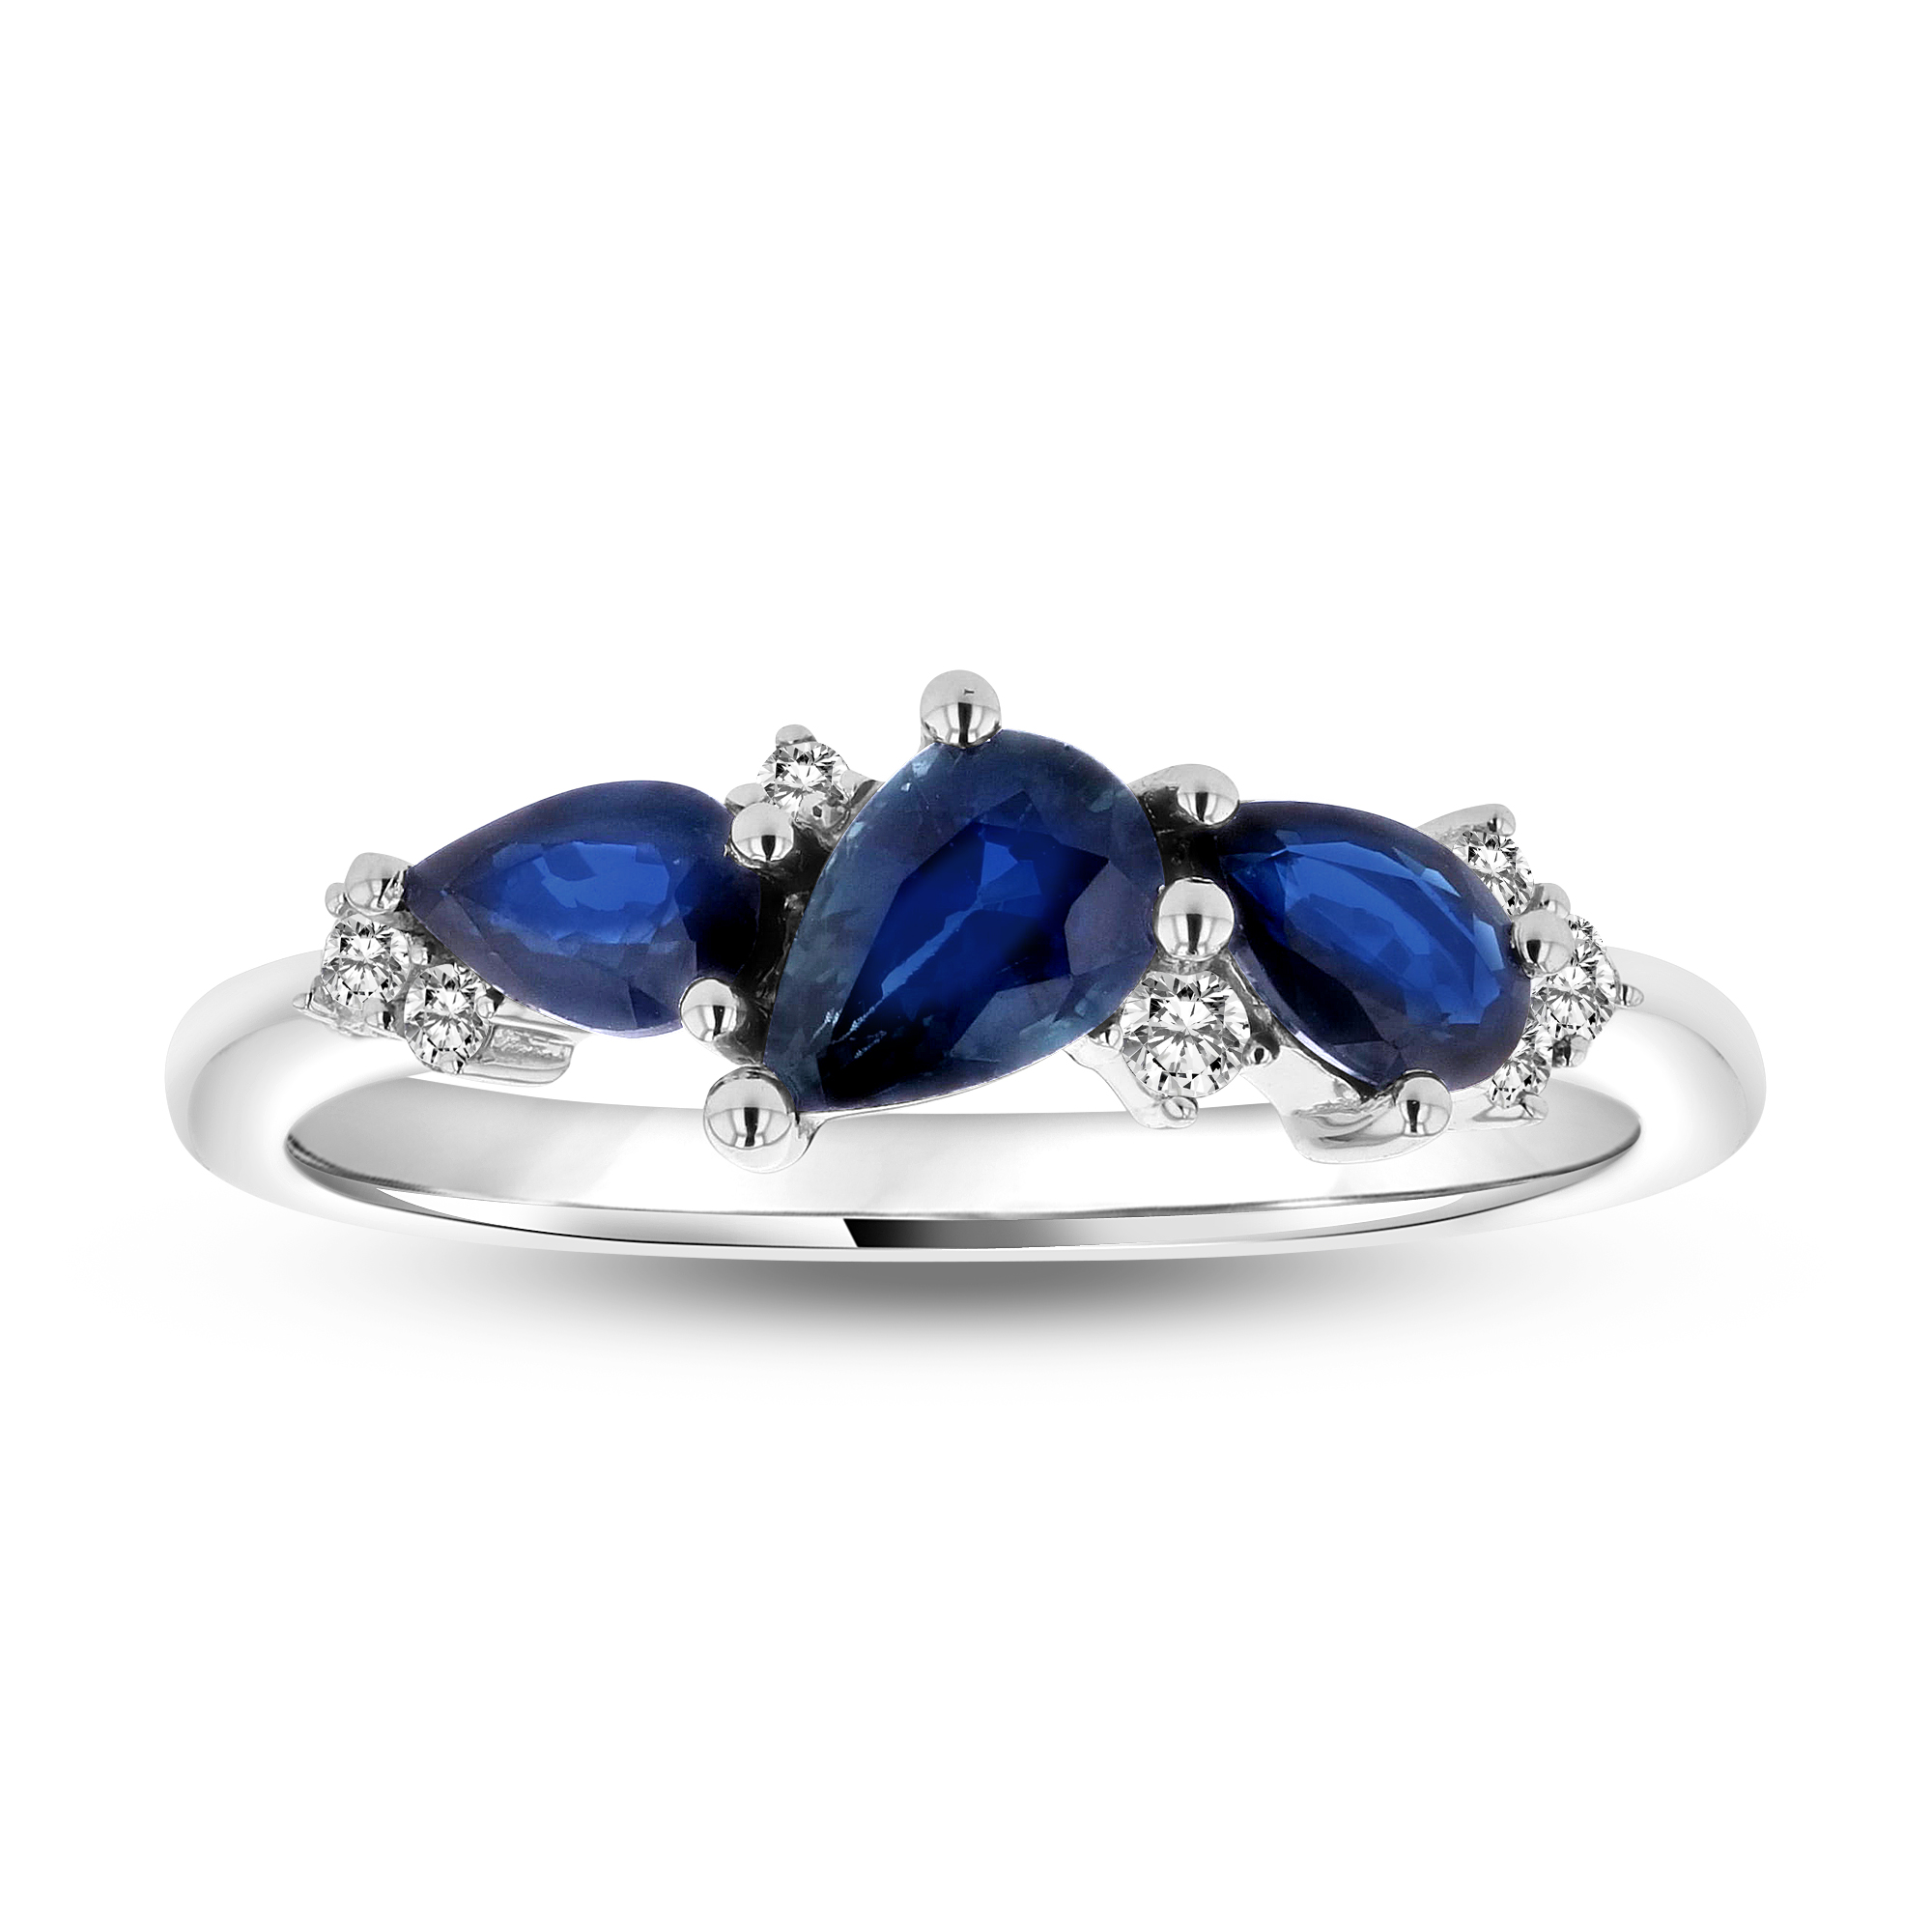 View 1.20ctw Diamond and Sapphire Ring in 14k White Gold